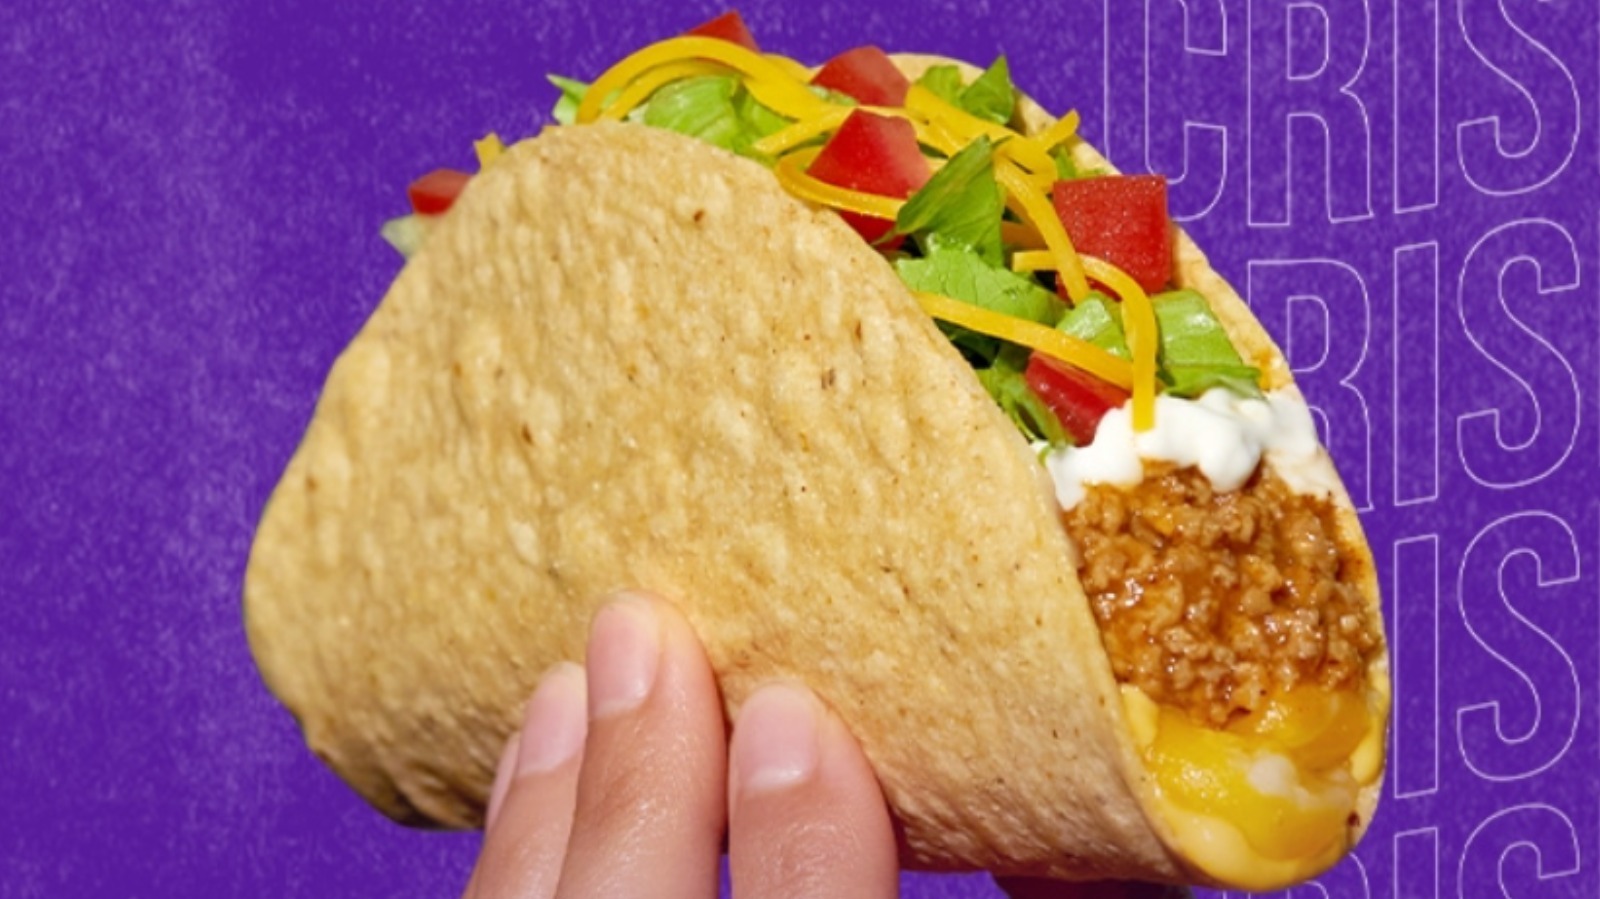 How many calories are in a chipotle chicken from Taco Bell?